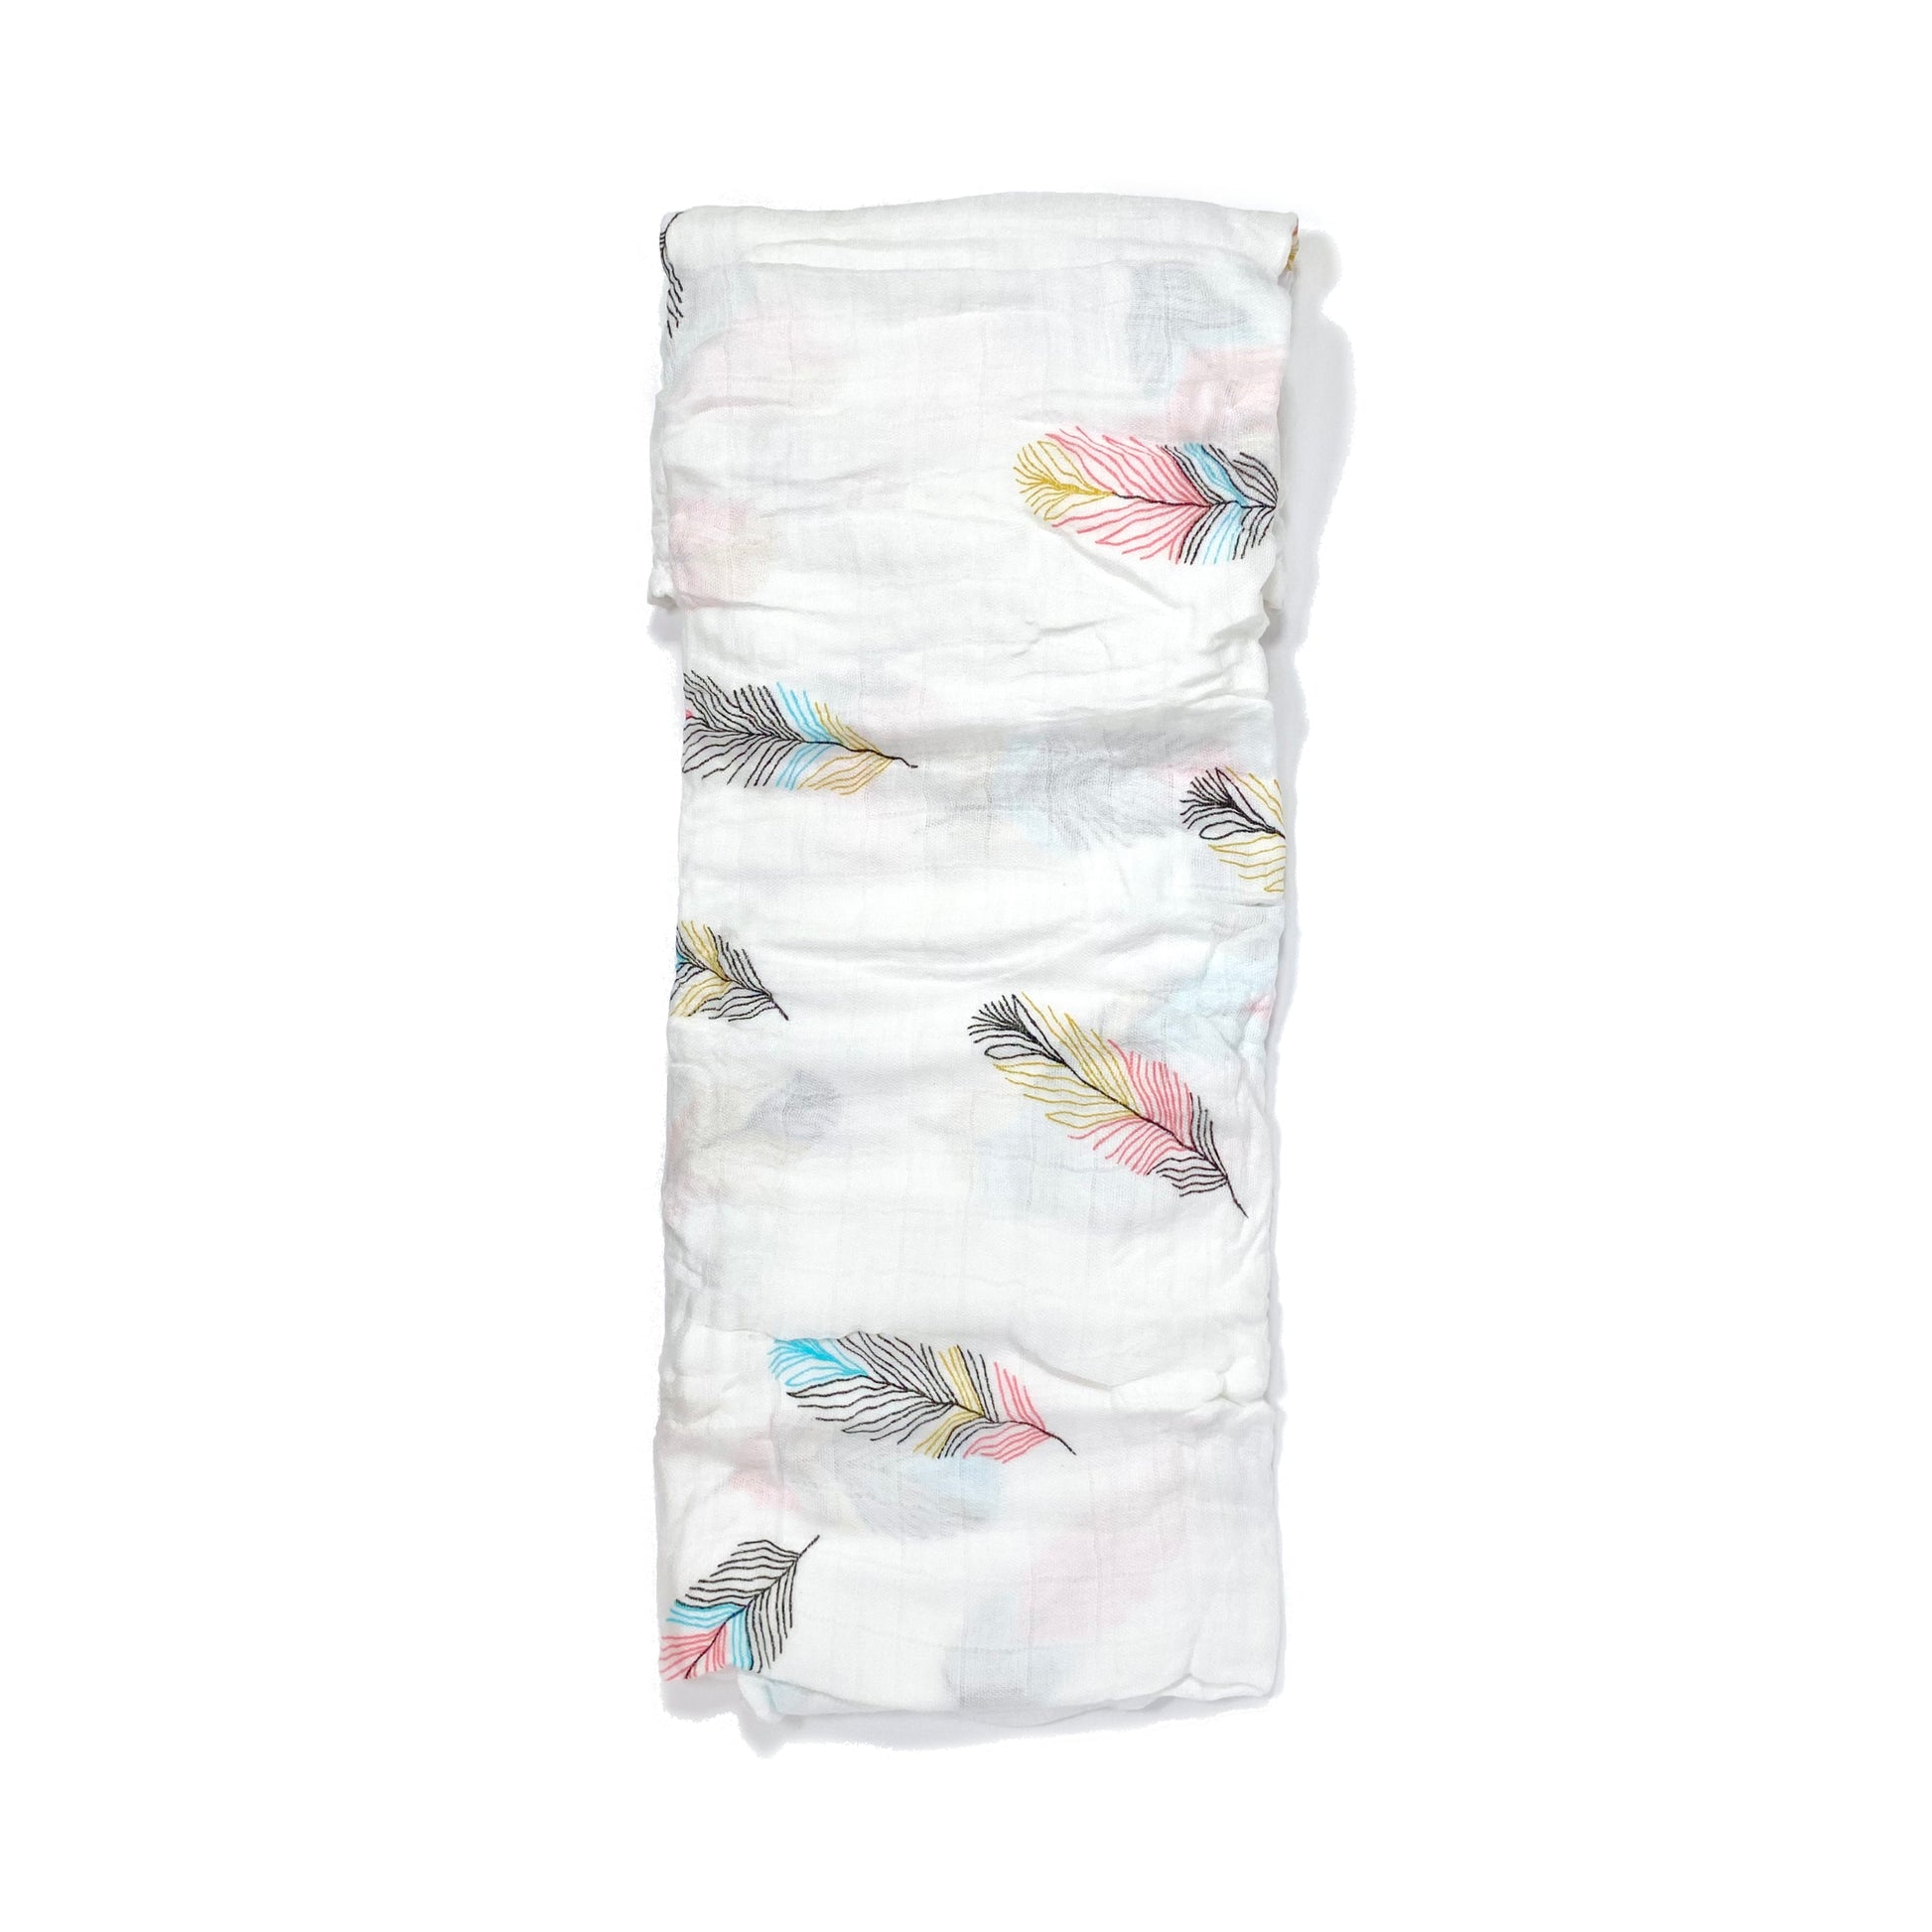 A folded muslin swaddle blanket with a feathers design.